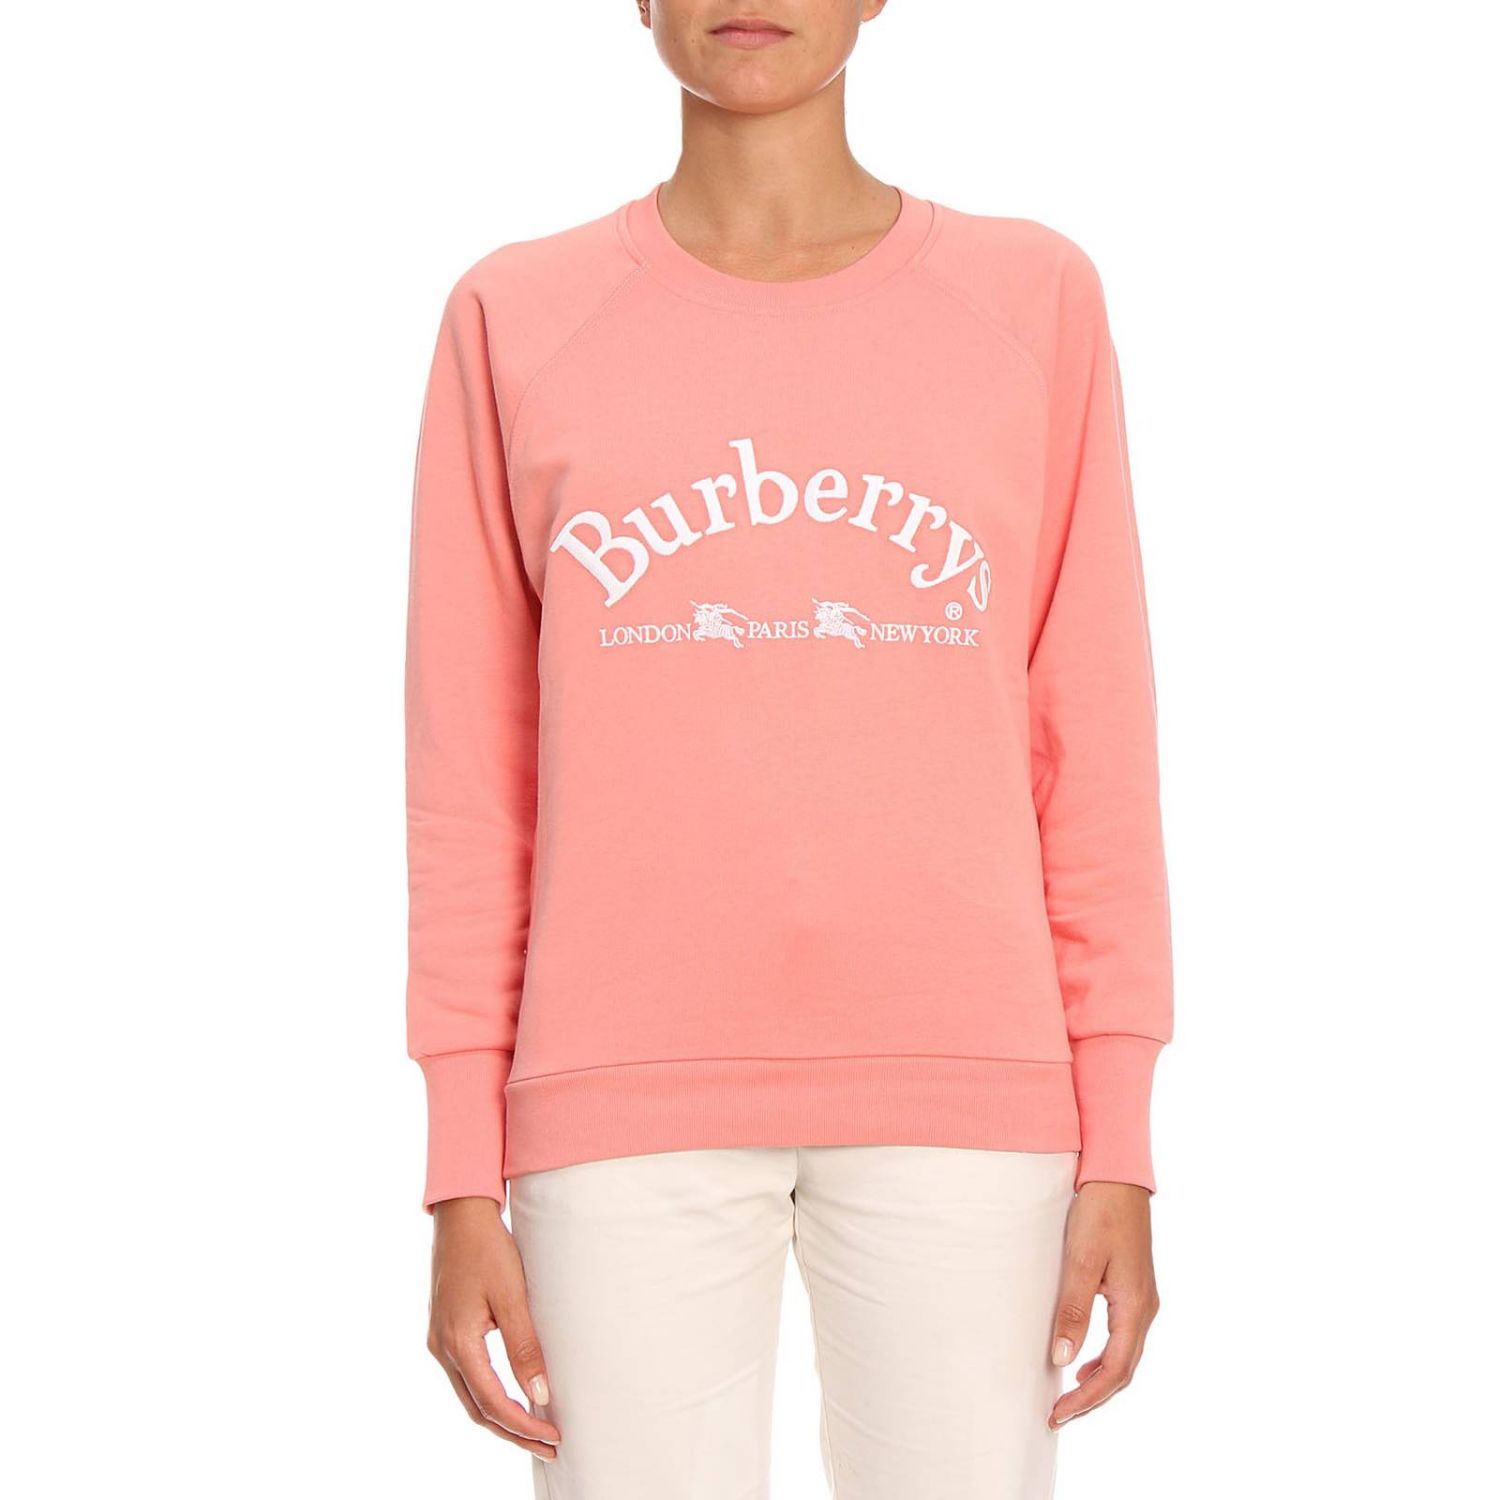 burberry sweater pink